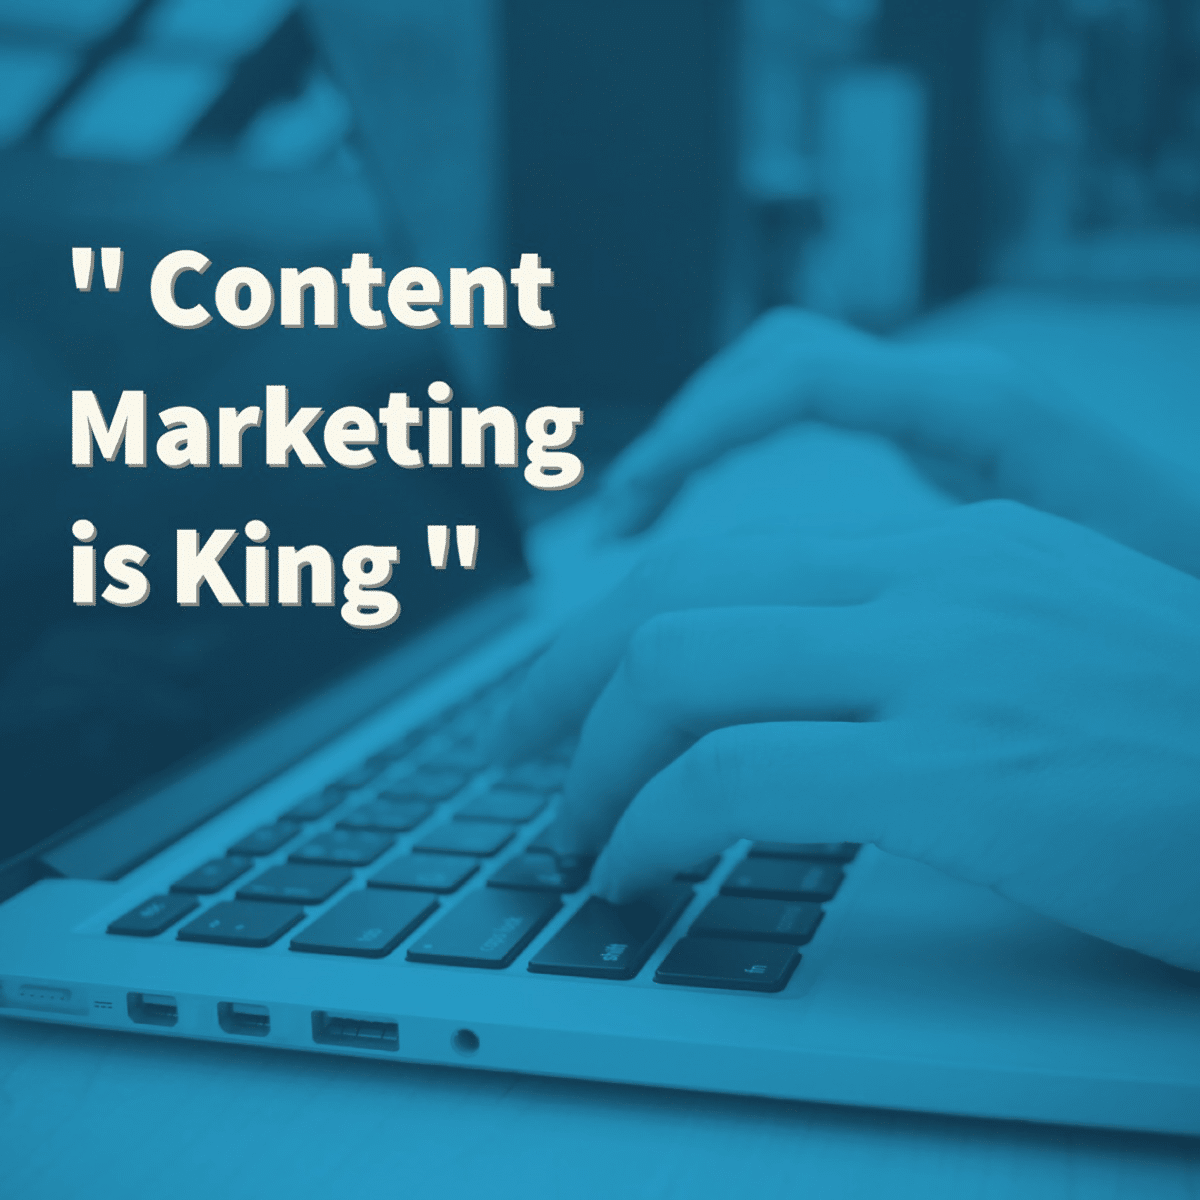 photo of man typing on laptop with quote "content marketing is king" from a content marketing agency